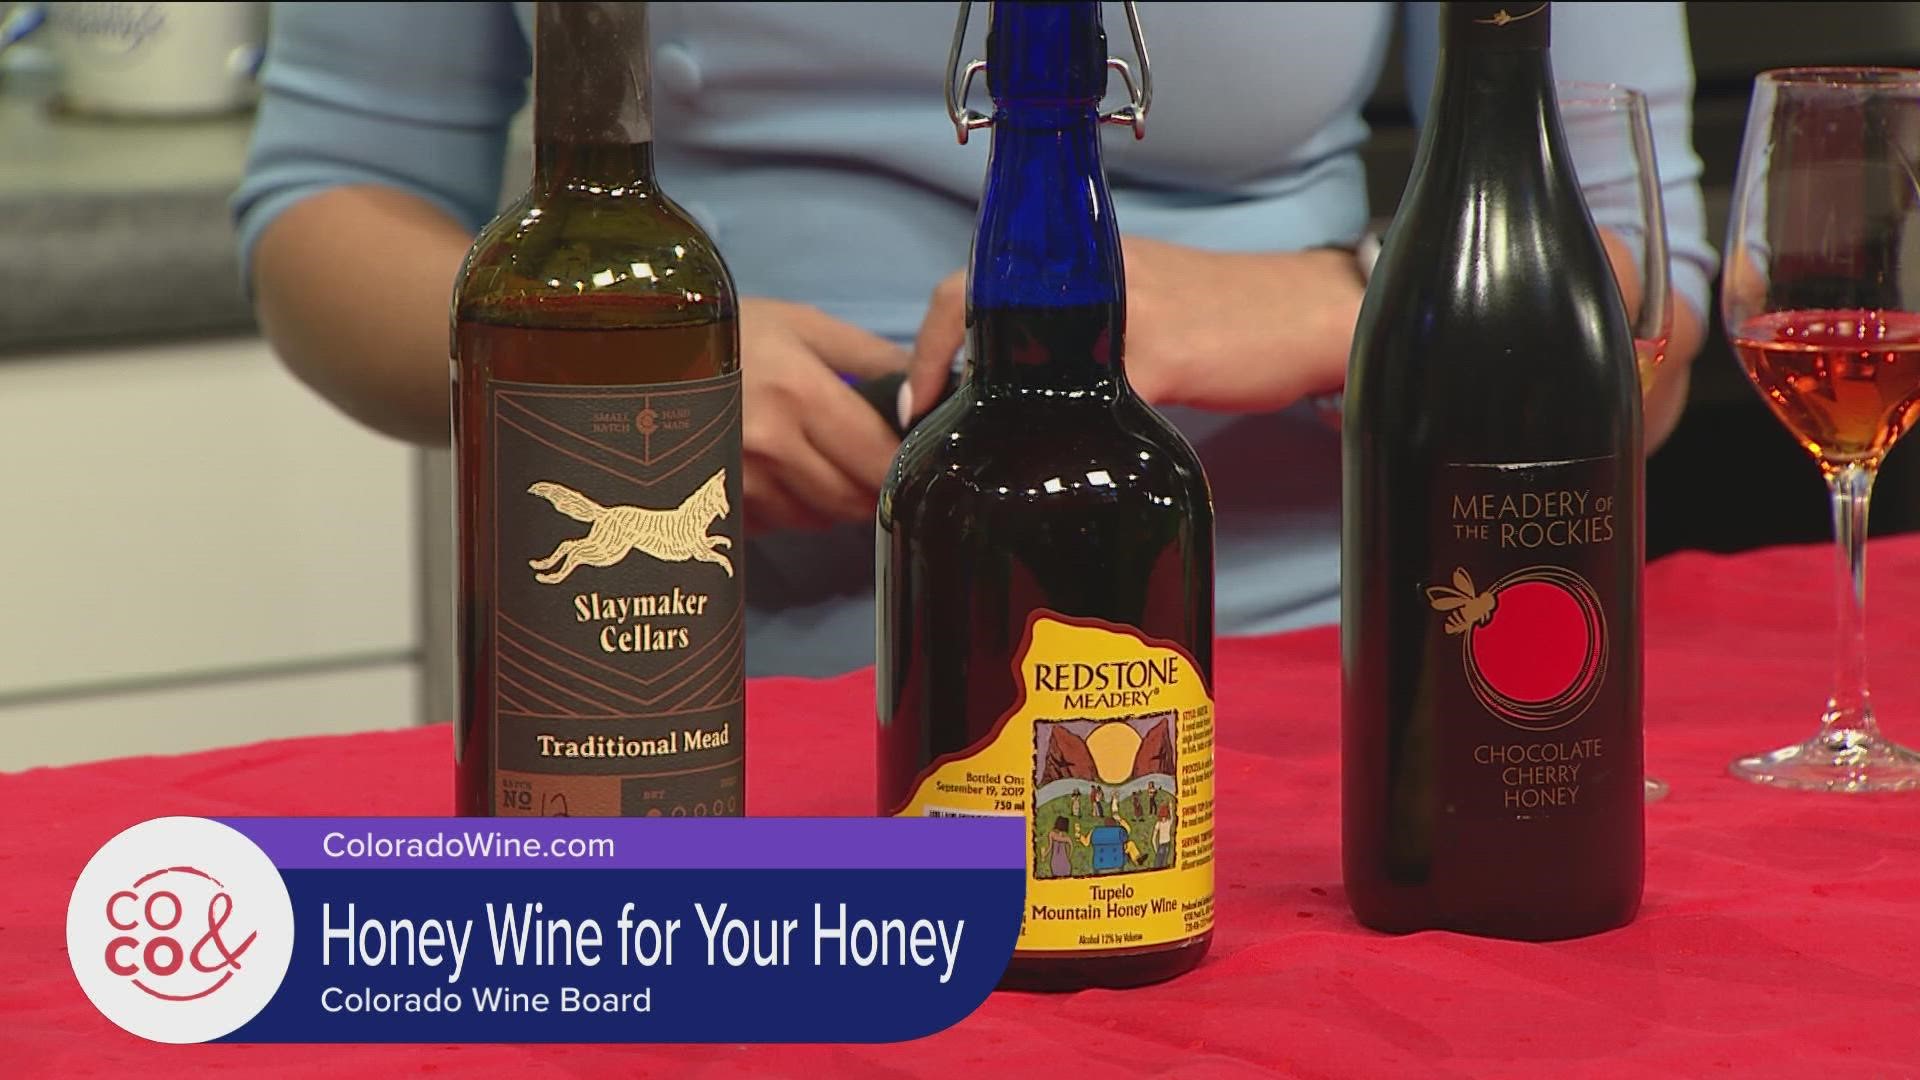 Check out the local Mead scene! Head to ColoradoWine.com to find where these great bottles are sold near you.